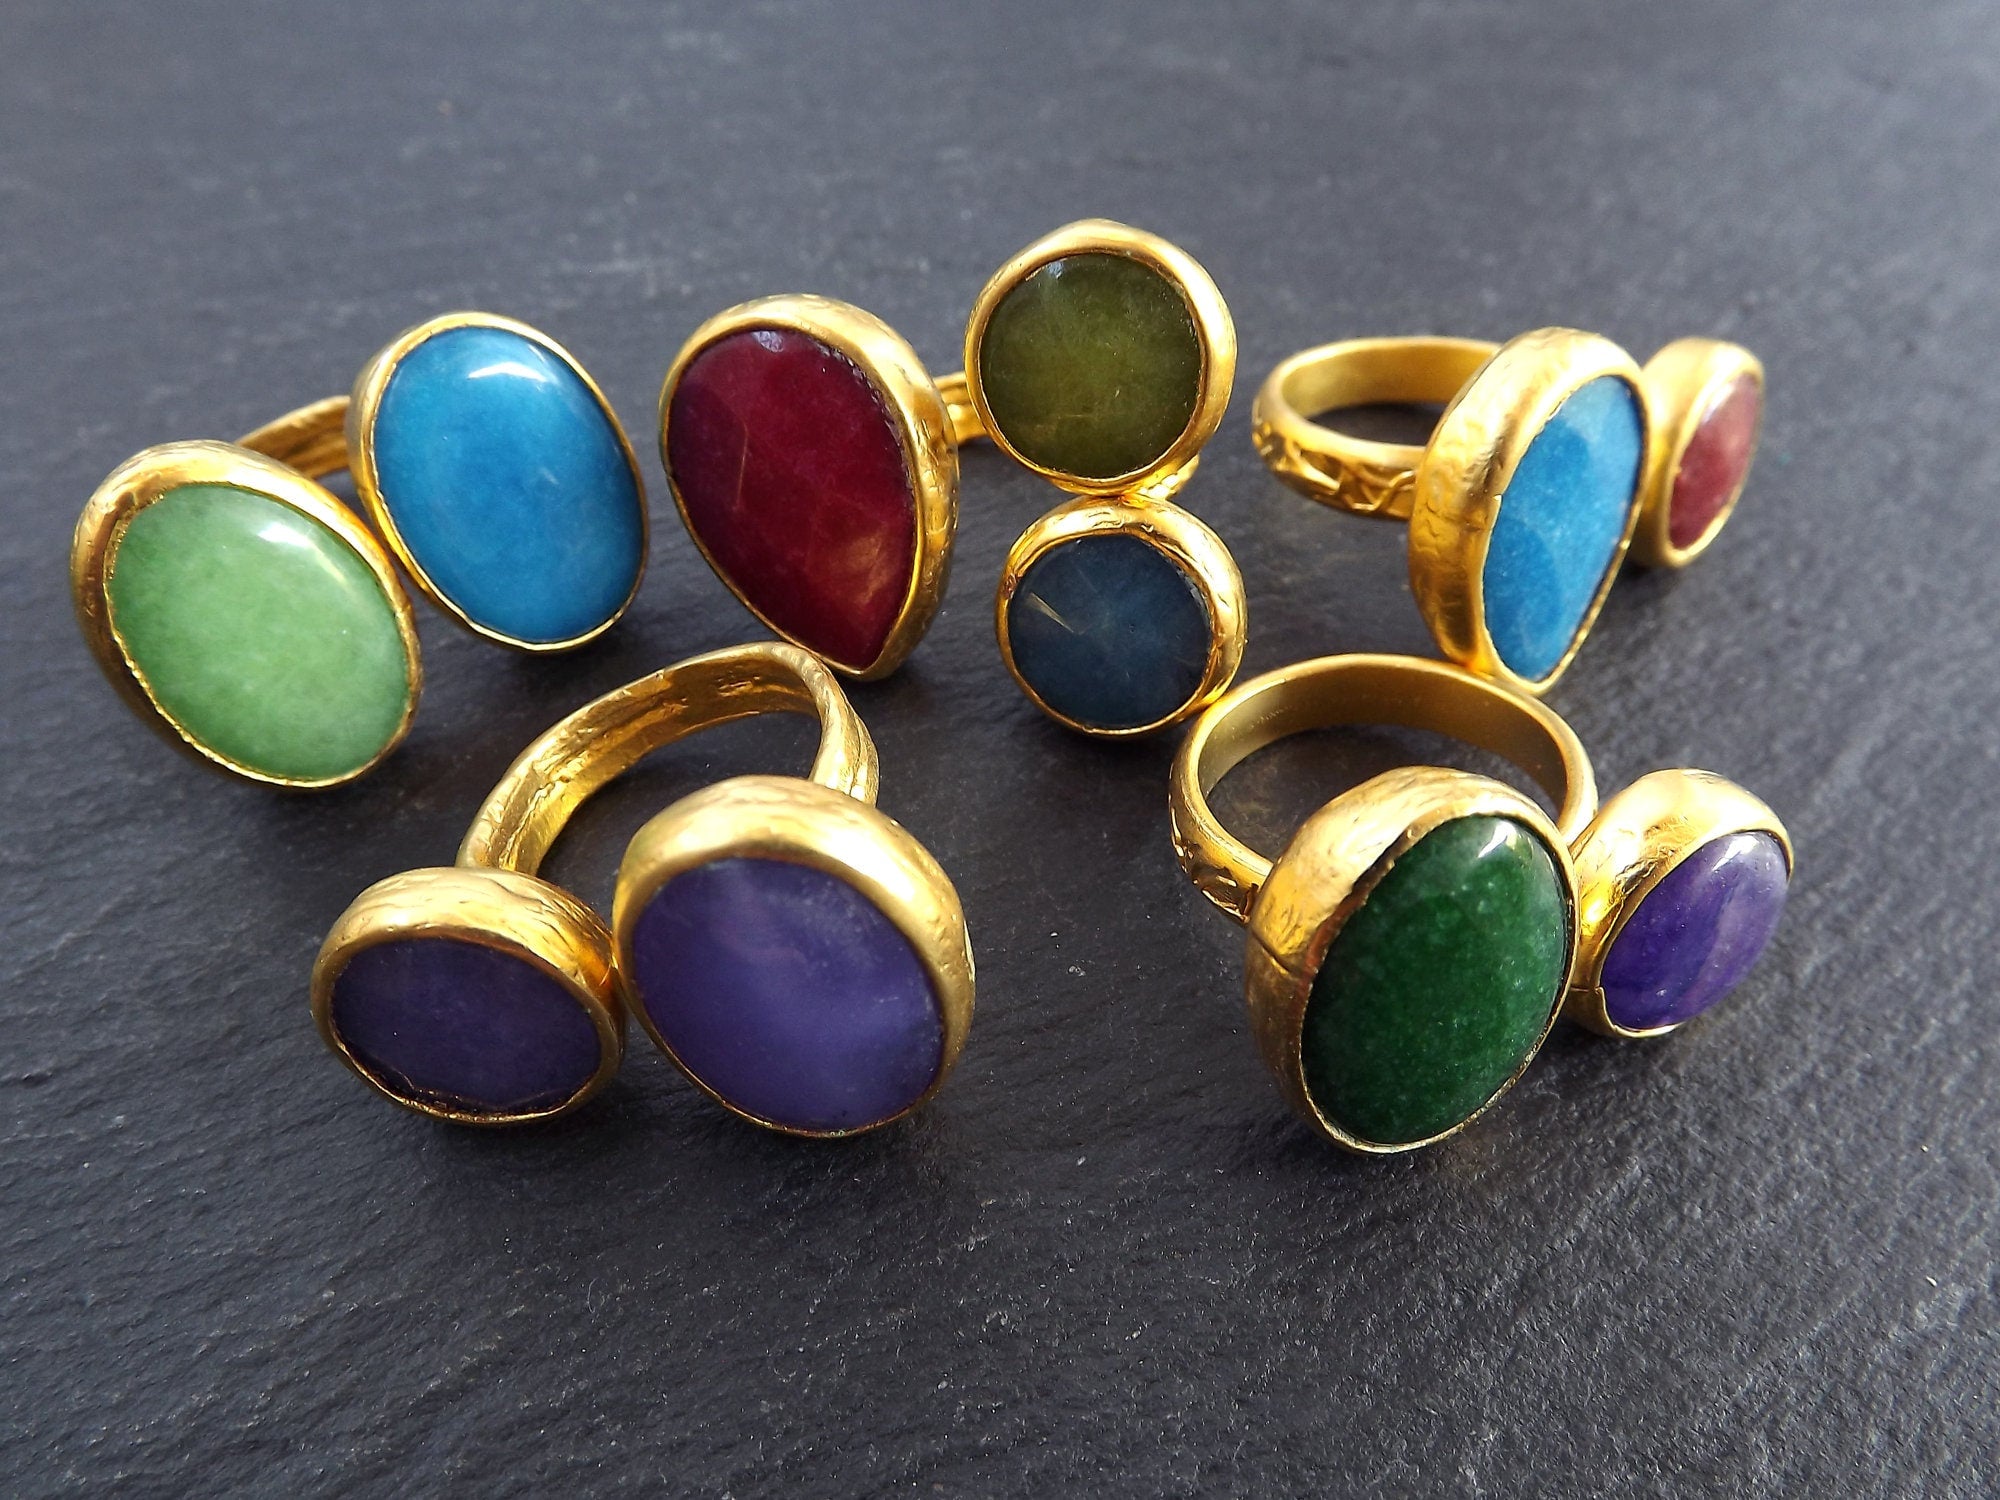 Wholesale Rings, Mix Jade Stone Double Rings Loops, Faceted Jade gemstones, Hammered Multicolor Turkish 22k Gold plated Bezel - LOT 1 - 5pcs